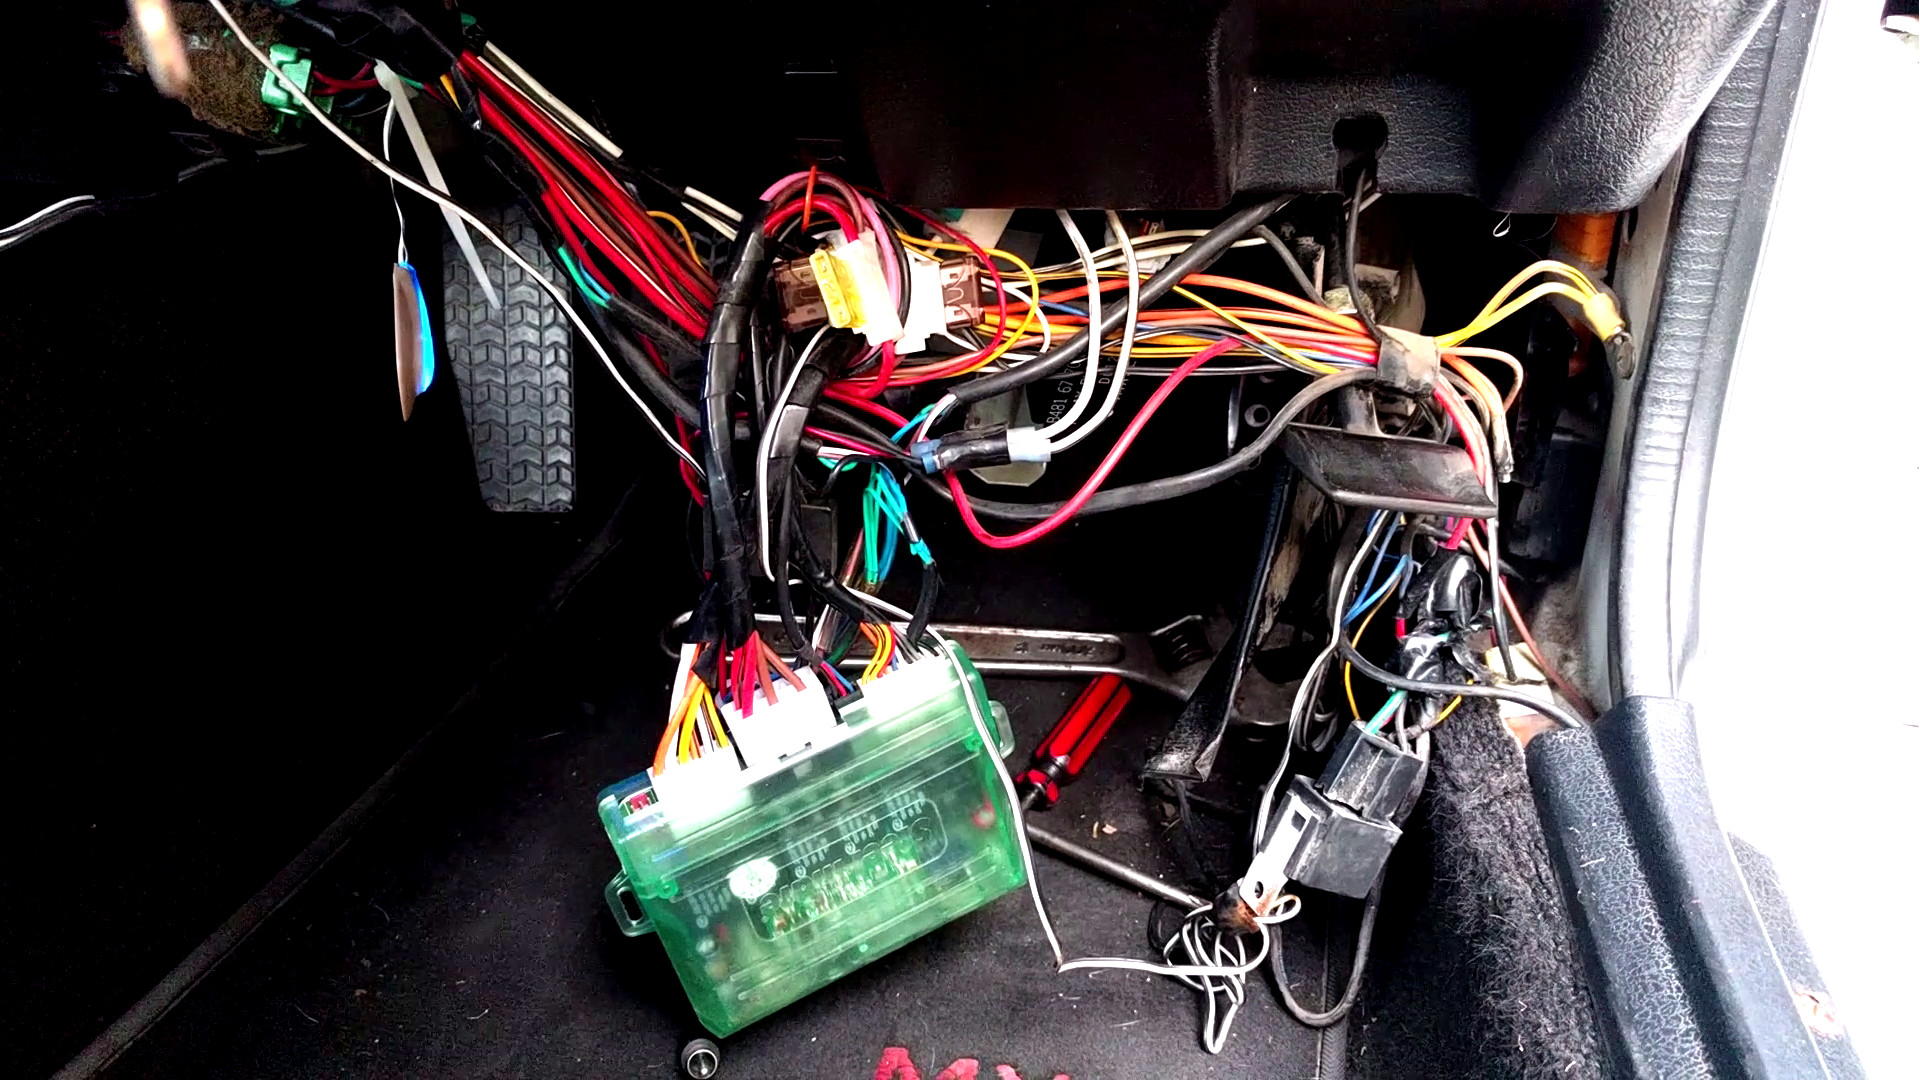 Used Dodge Wiring Harness D350 Parts For Sale from hackaday.com